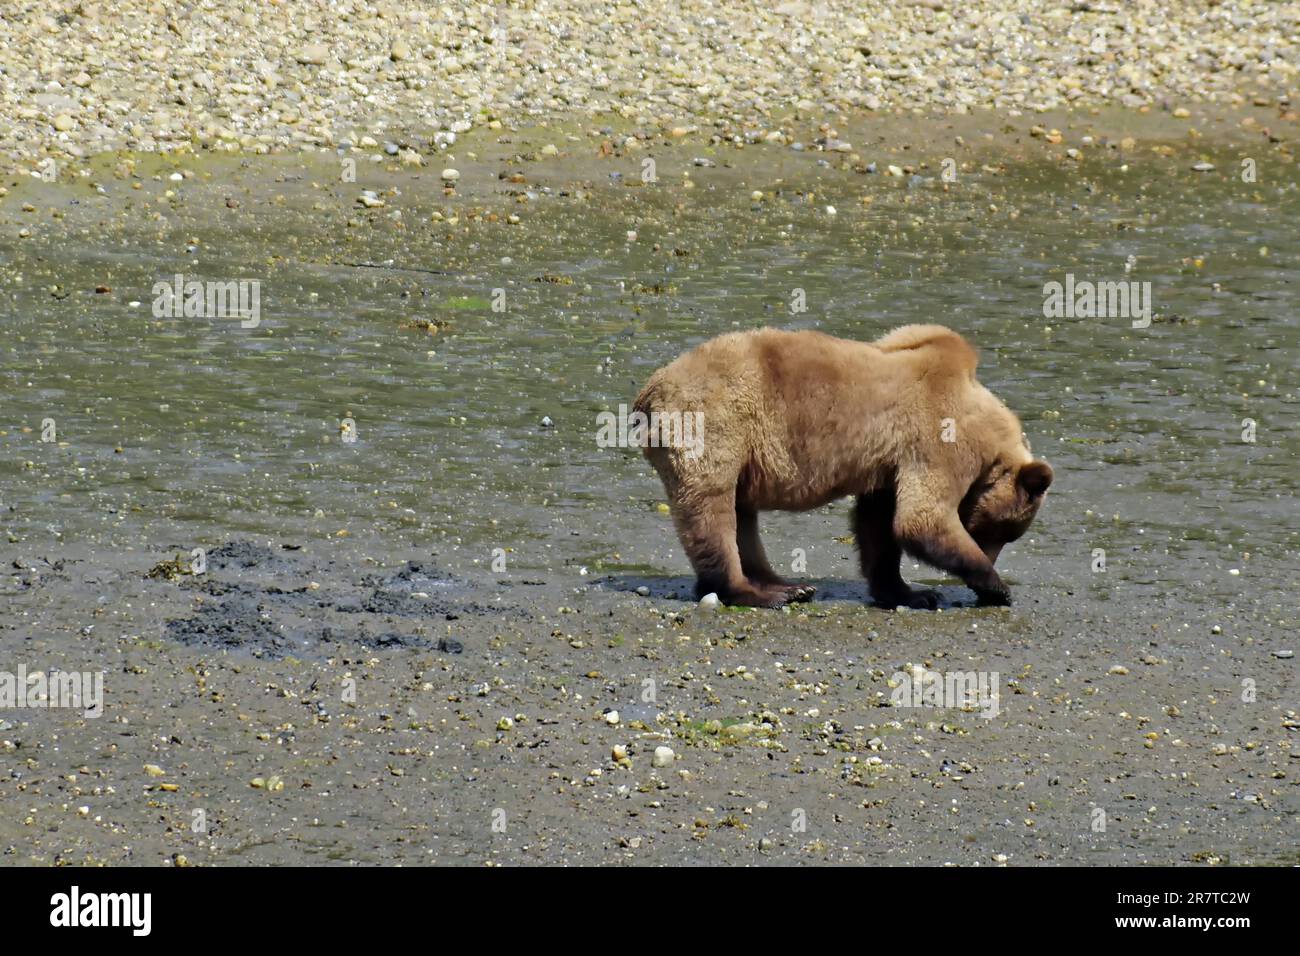 Grizzly looking for shells on the beach, National Park, Khutzeymateen Grizzly Bear Sanctuary, Prince Rupert, British Columbia, Canada Stock Photo